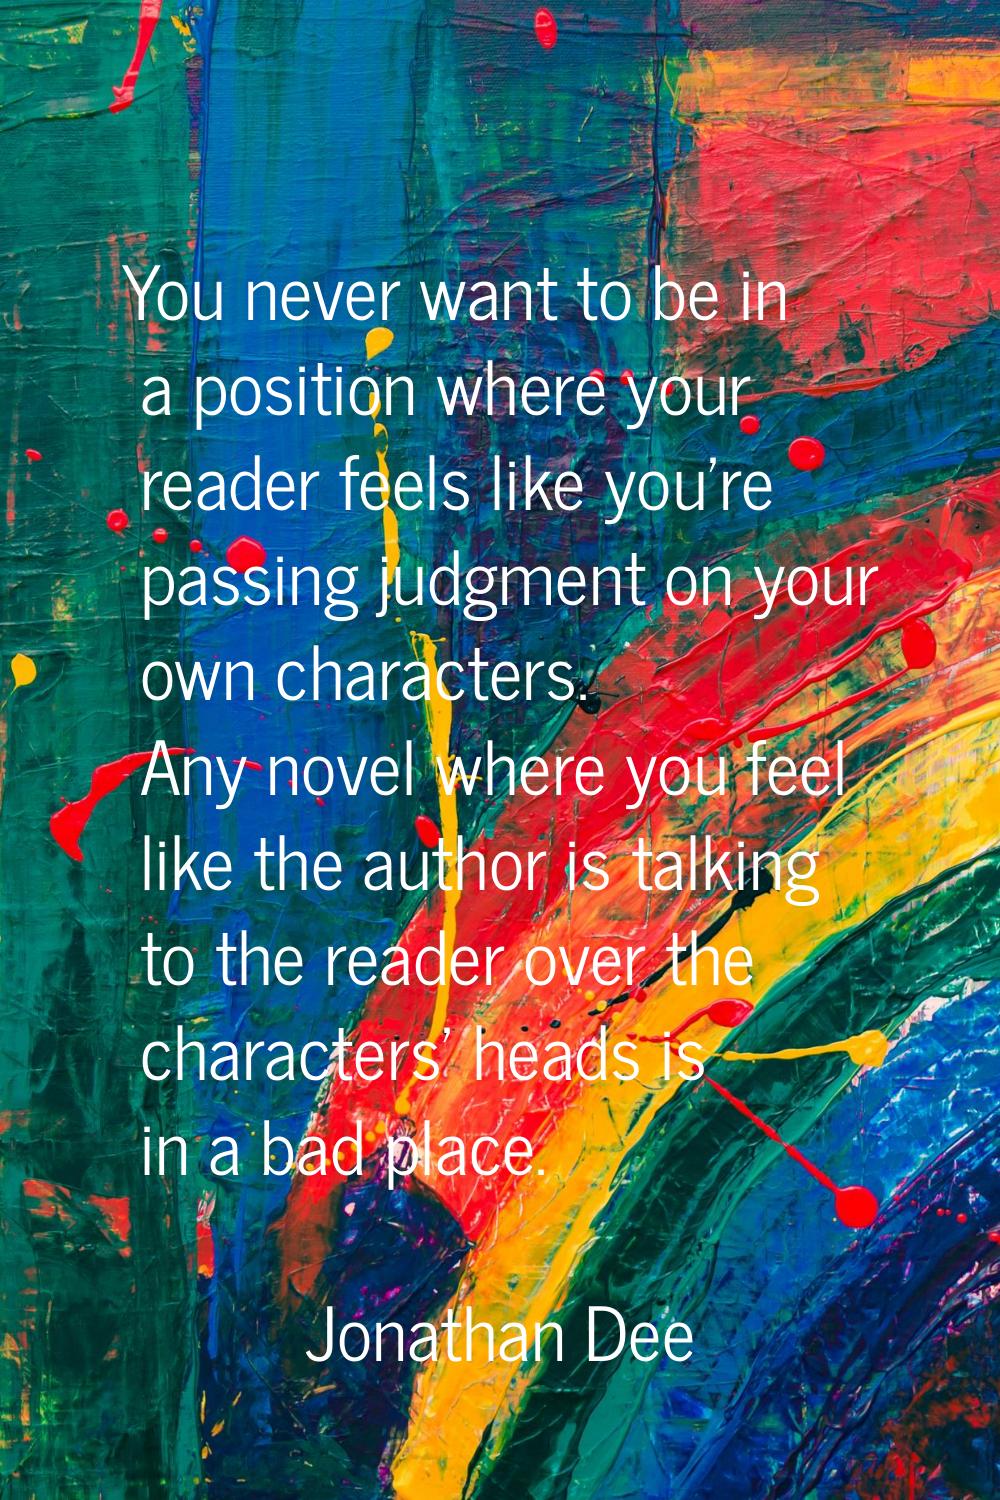 You never want to be in a position where your reader feels like you're passing judgment on your own